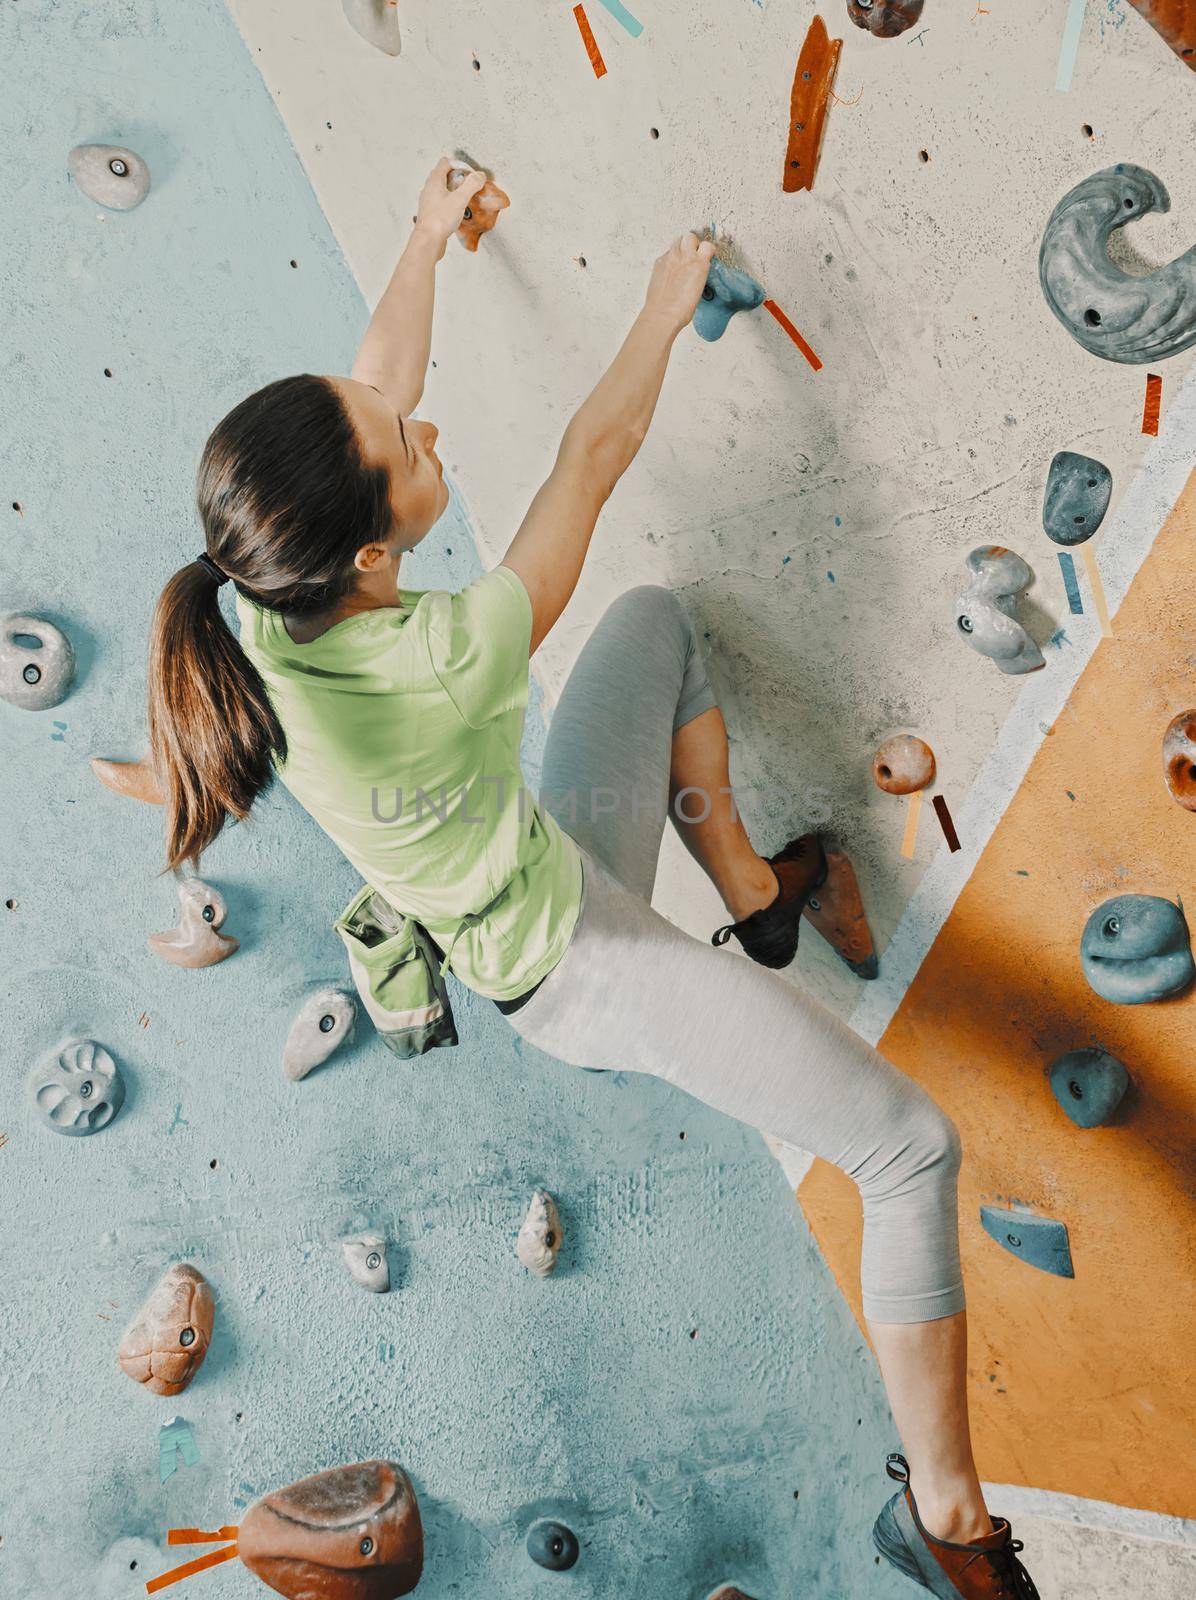 Sporty young woman free climbing on practical wall in gym, bouldering.